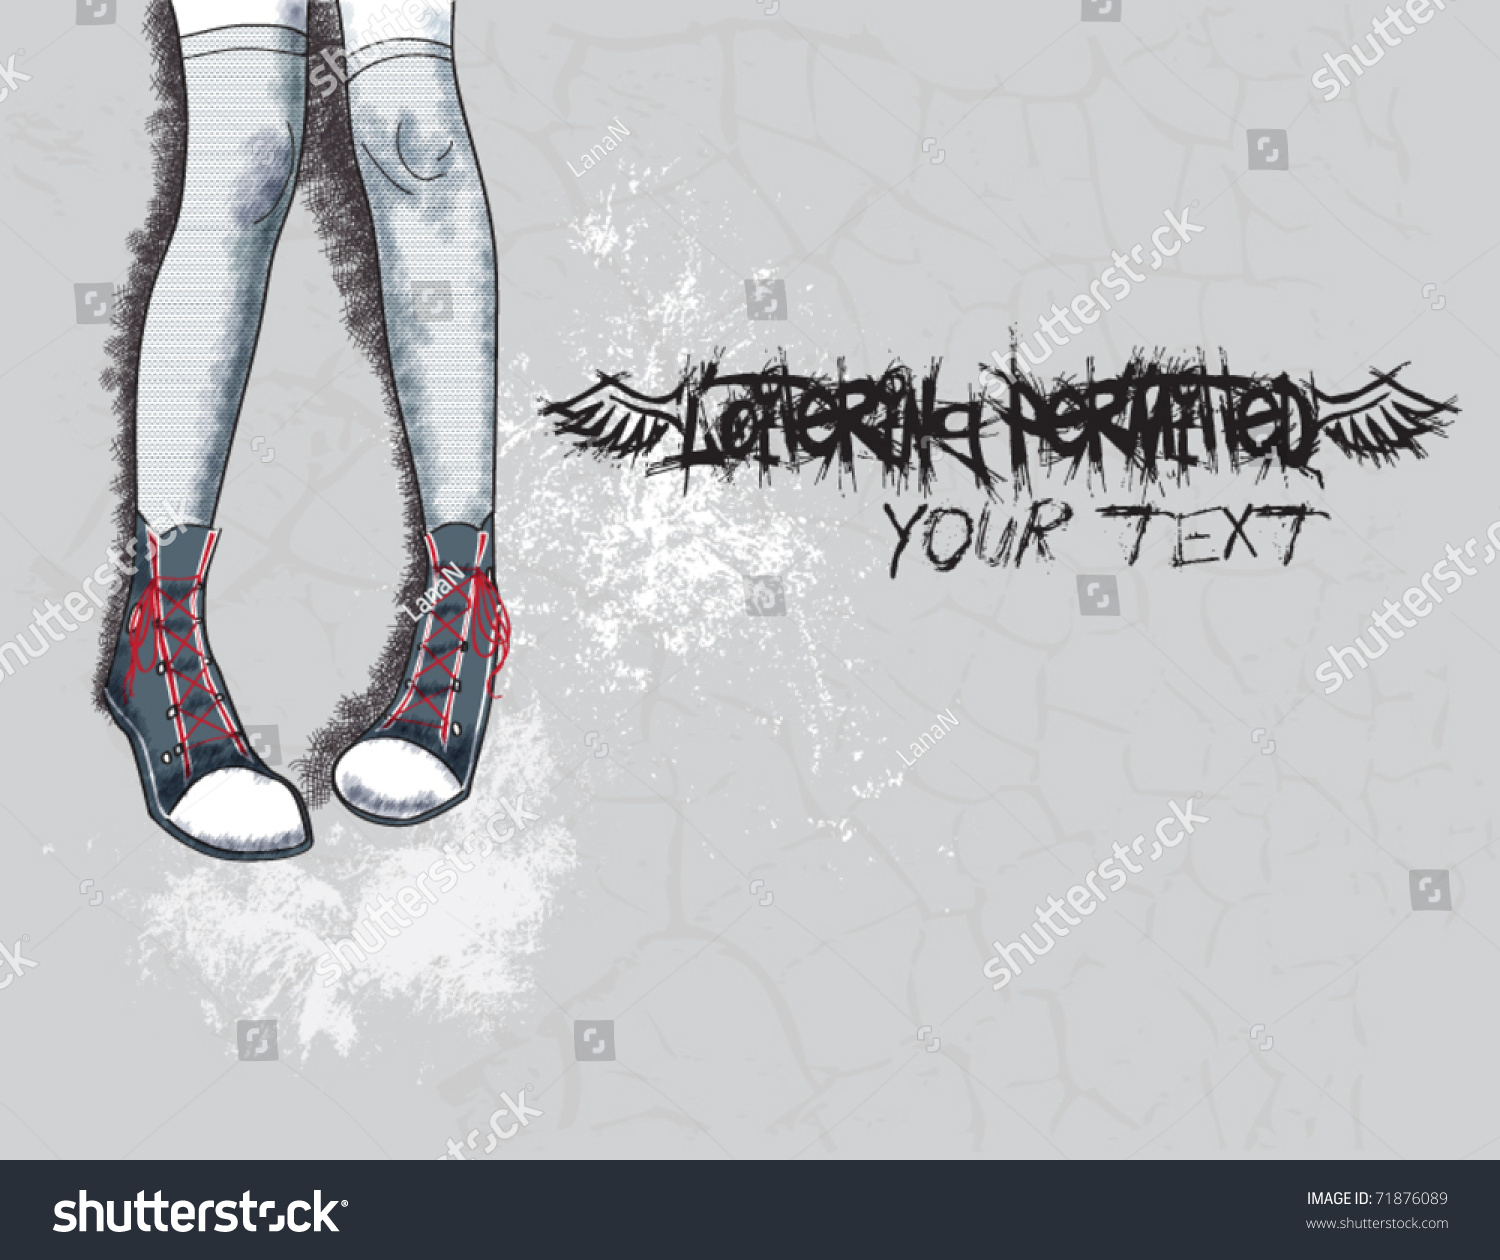 SVG of Loitering - Background wall with graffiti svg